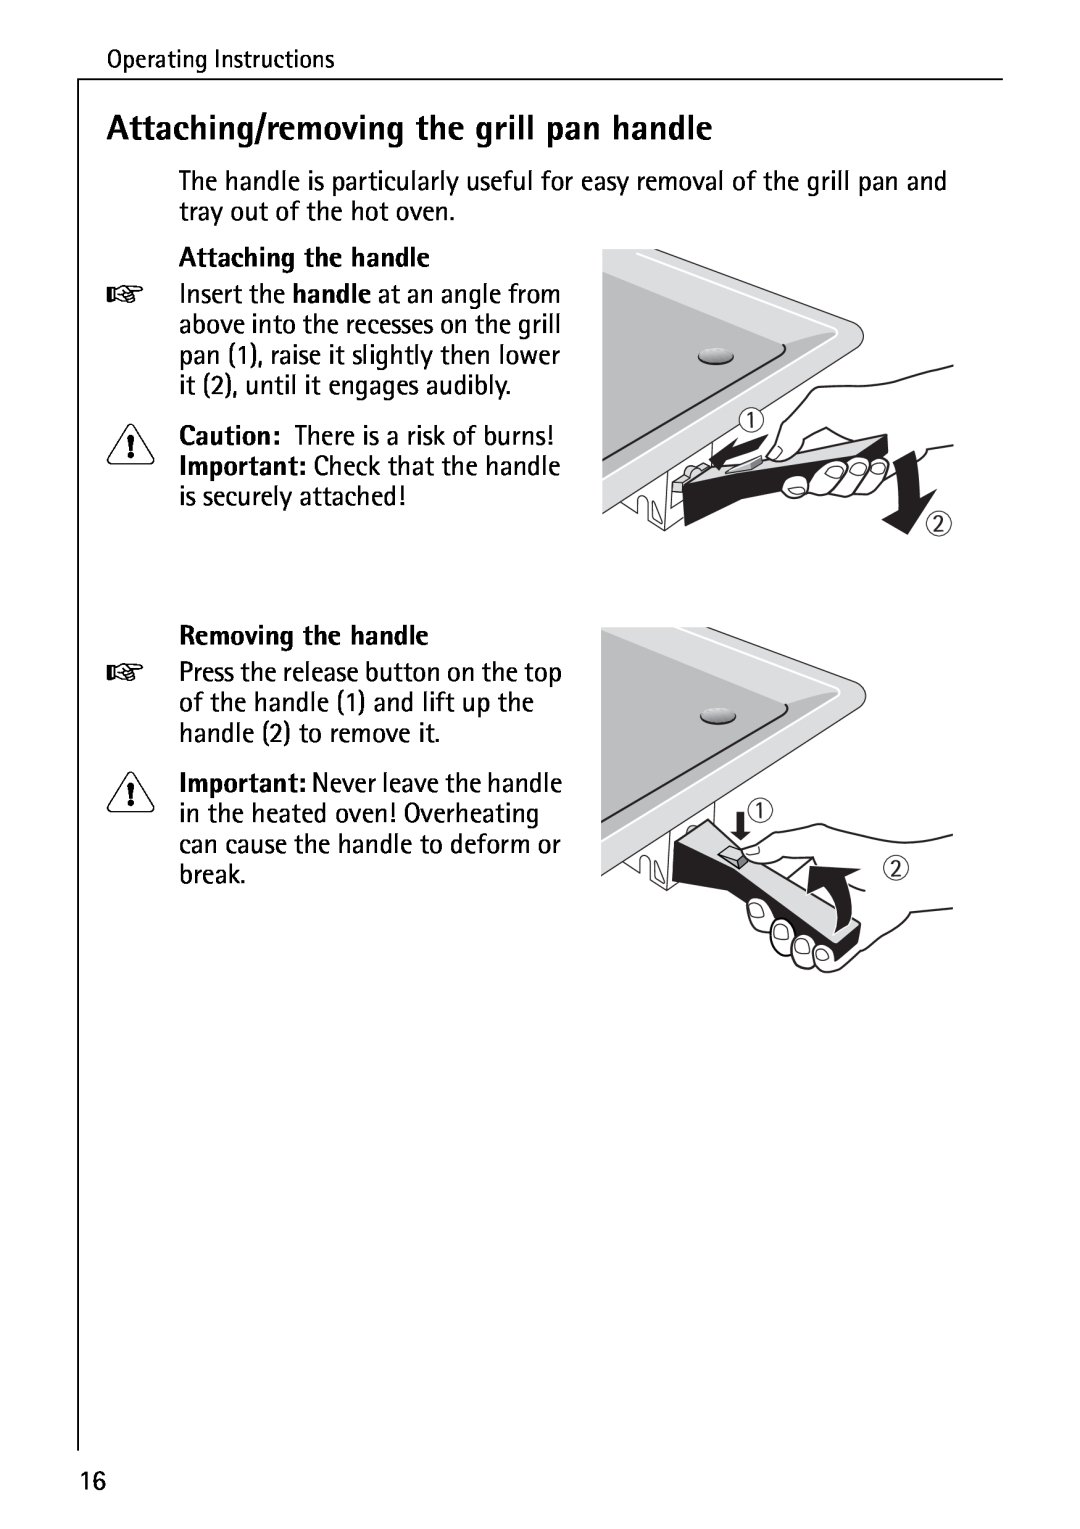 AEG B 4100 operating instructions Attaching/removing the grill pan handle, Attaching the handle, Removing the handle 